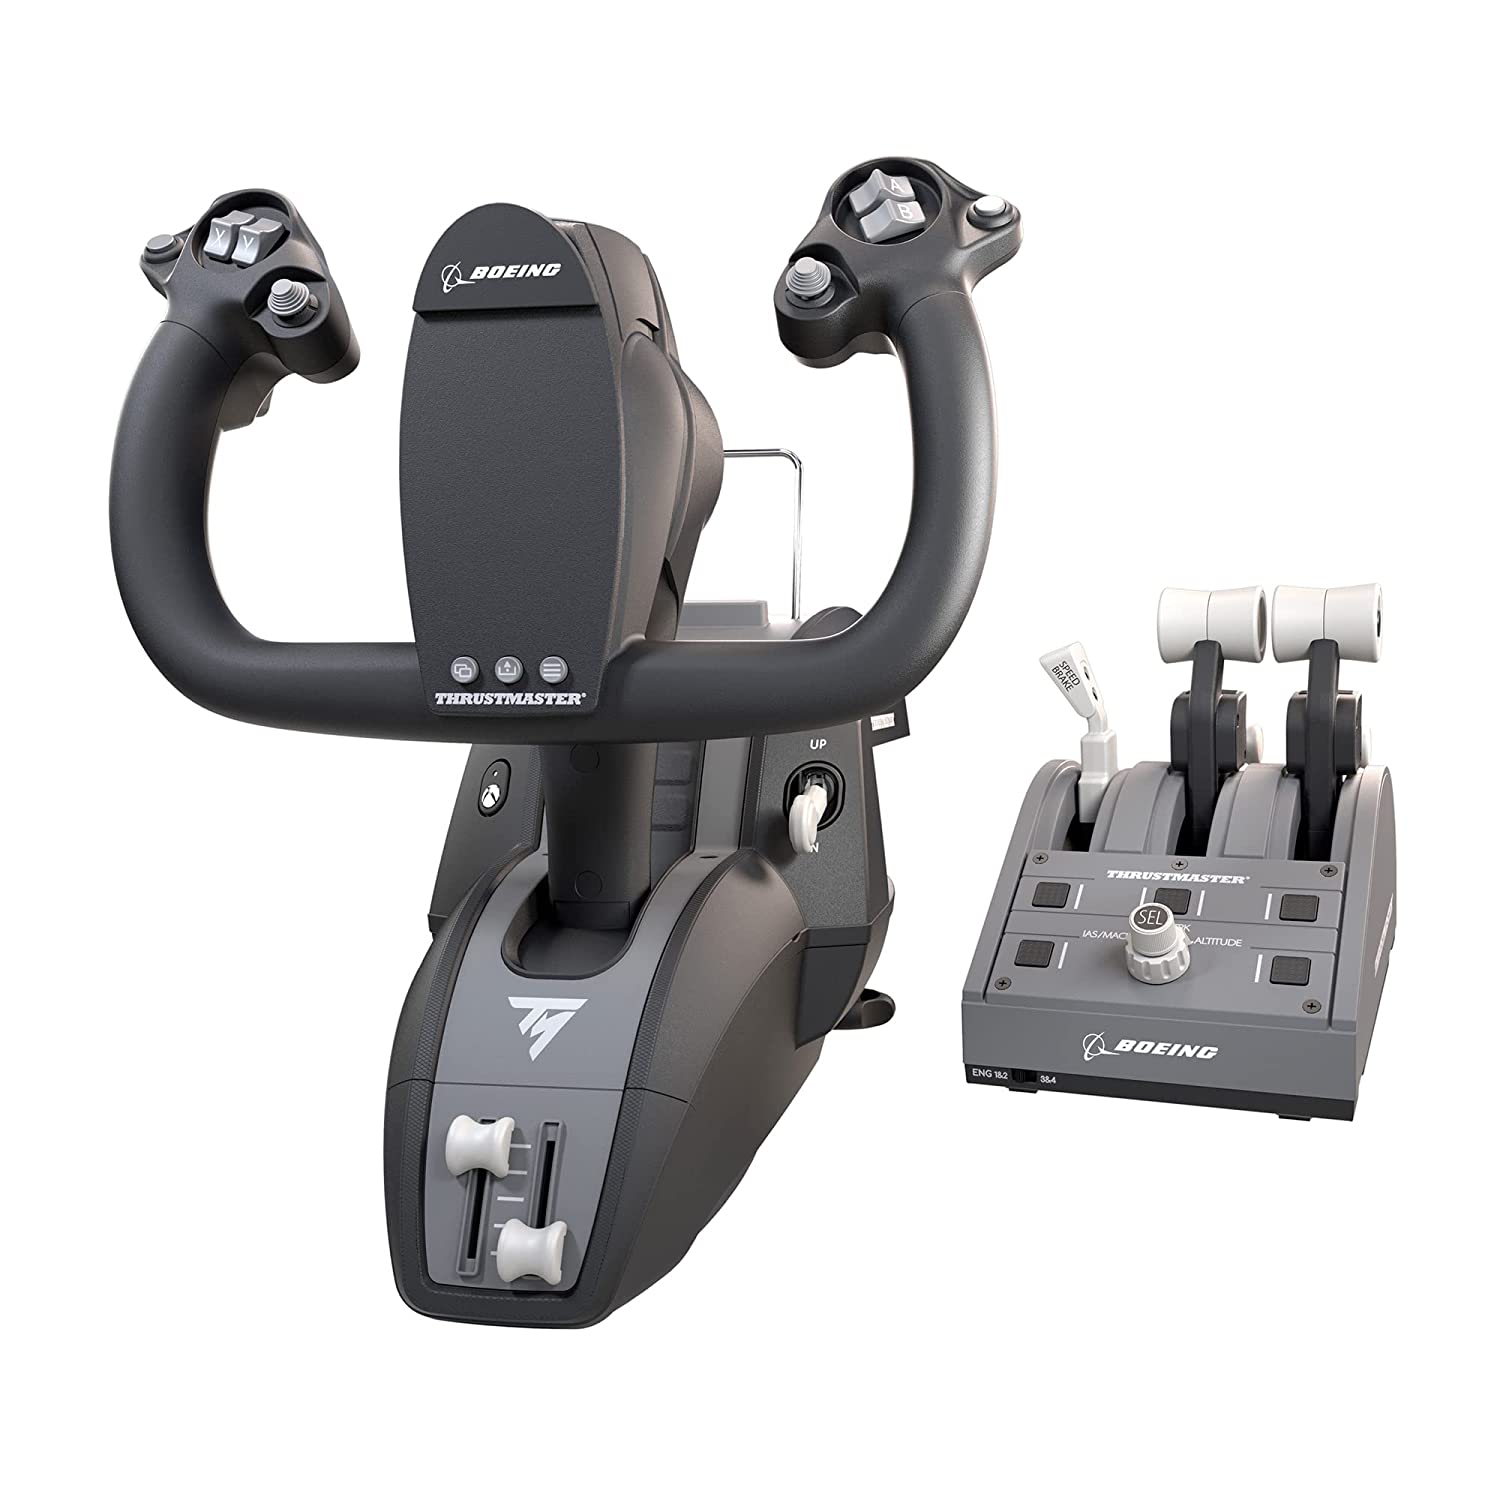 THRUSTMASTER TCA YOKE PACK BOEING EDITION for PC &amp; XBOX - 4460210